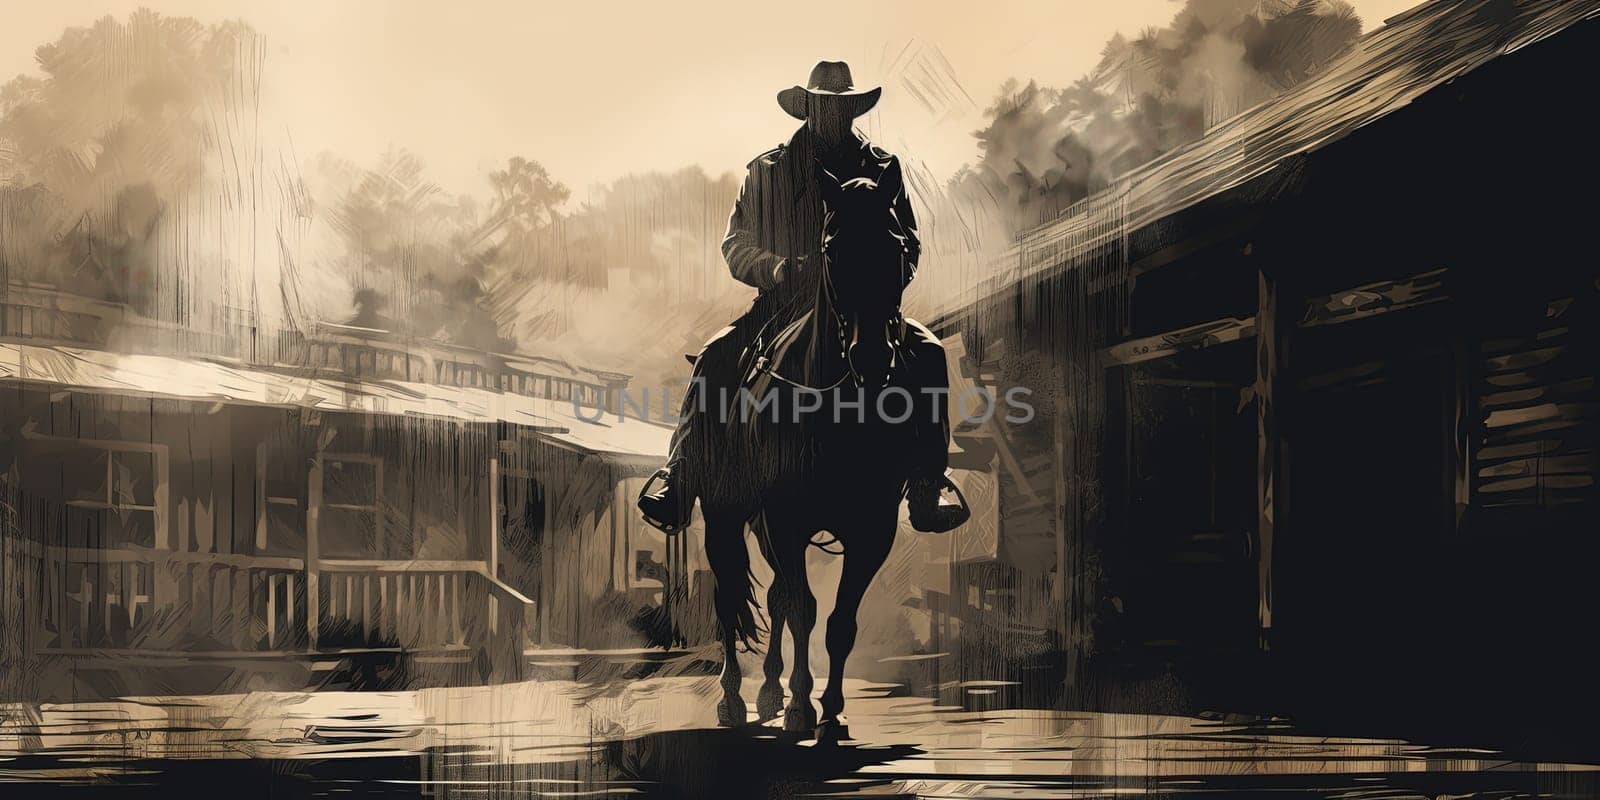 A captivating scene of a cowboy on horseback in a vintage Western town by Kadula